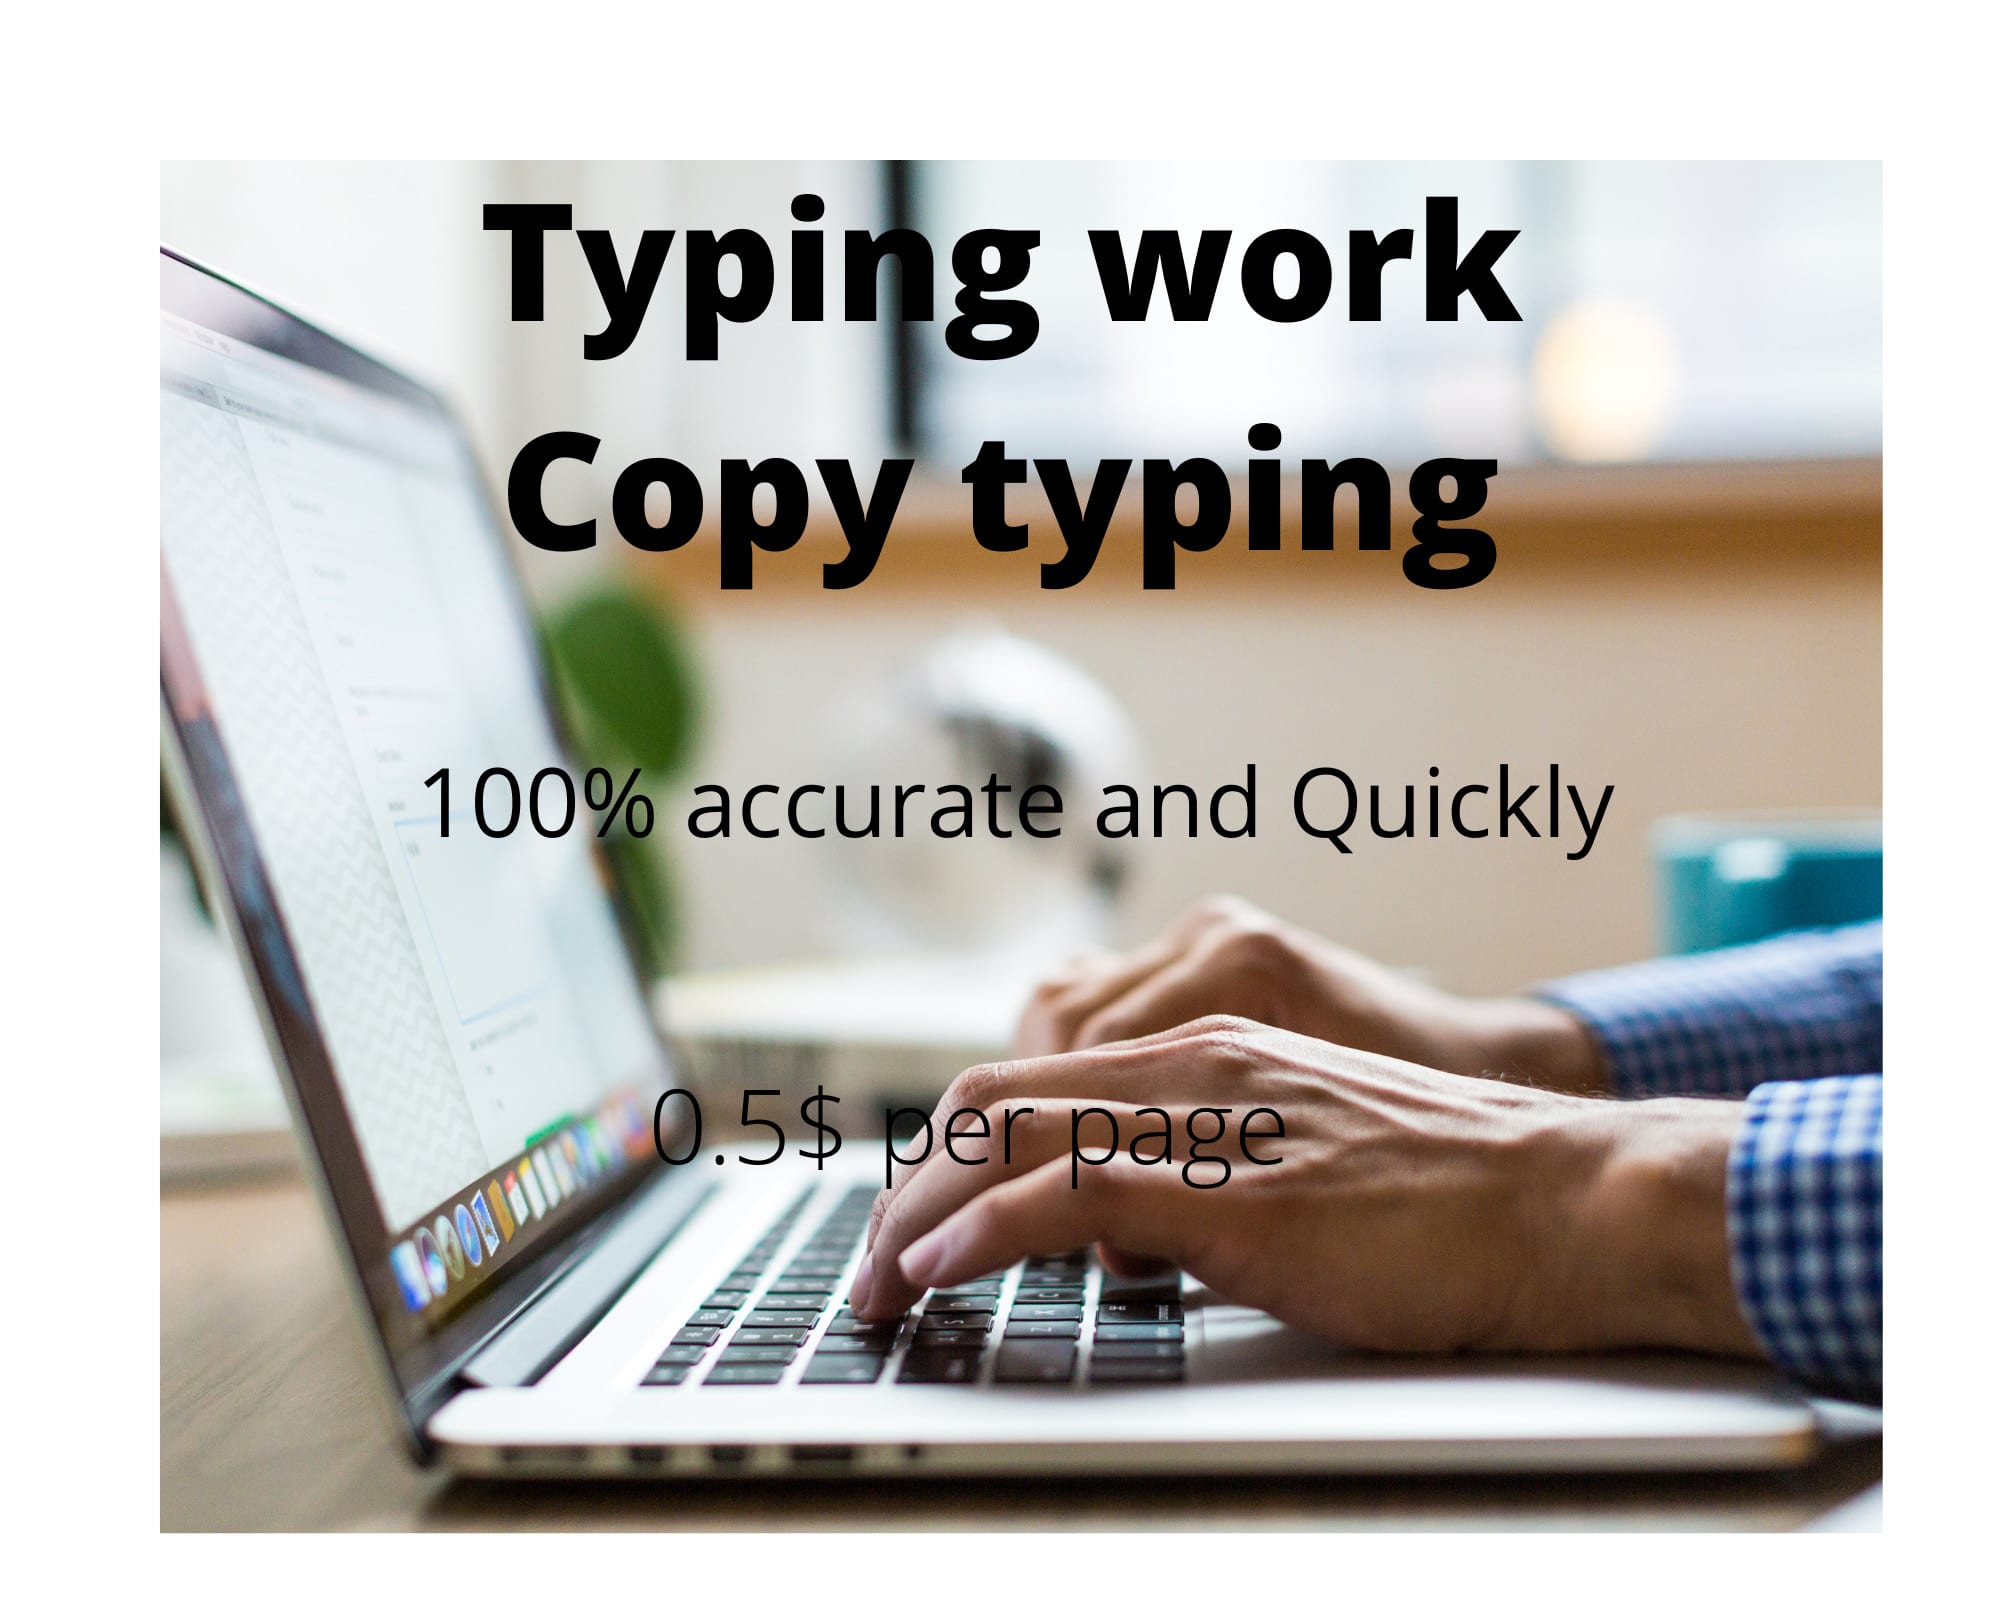 My typing speed is 45+ can I work on freelancer.com as a copy